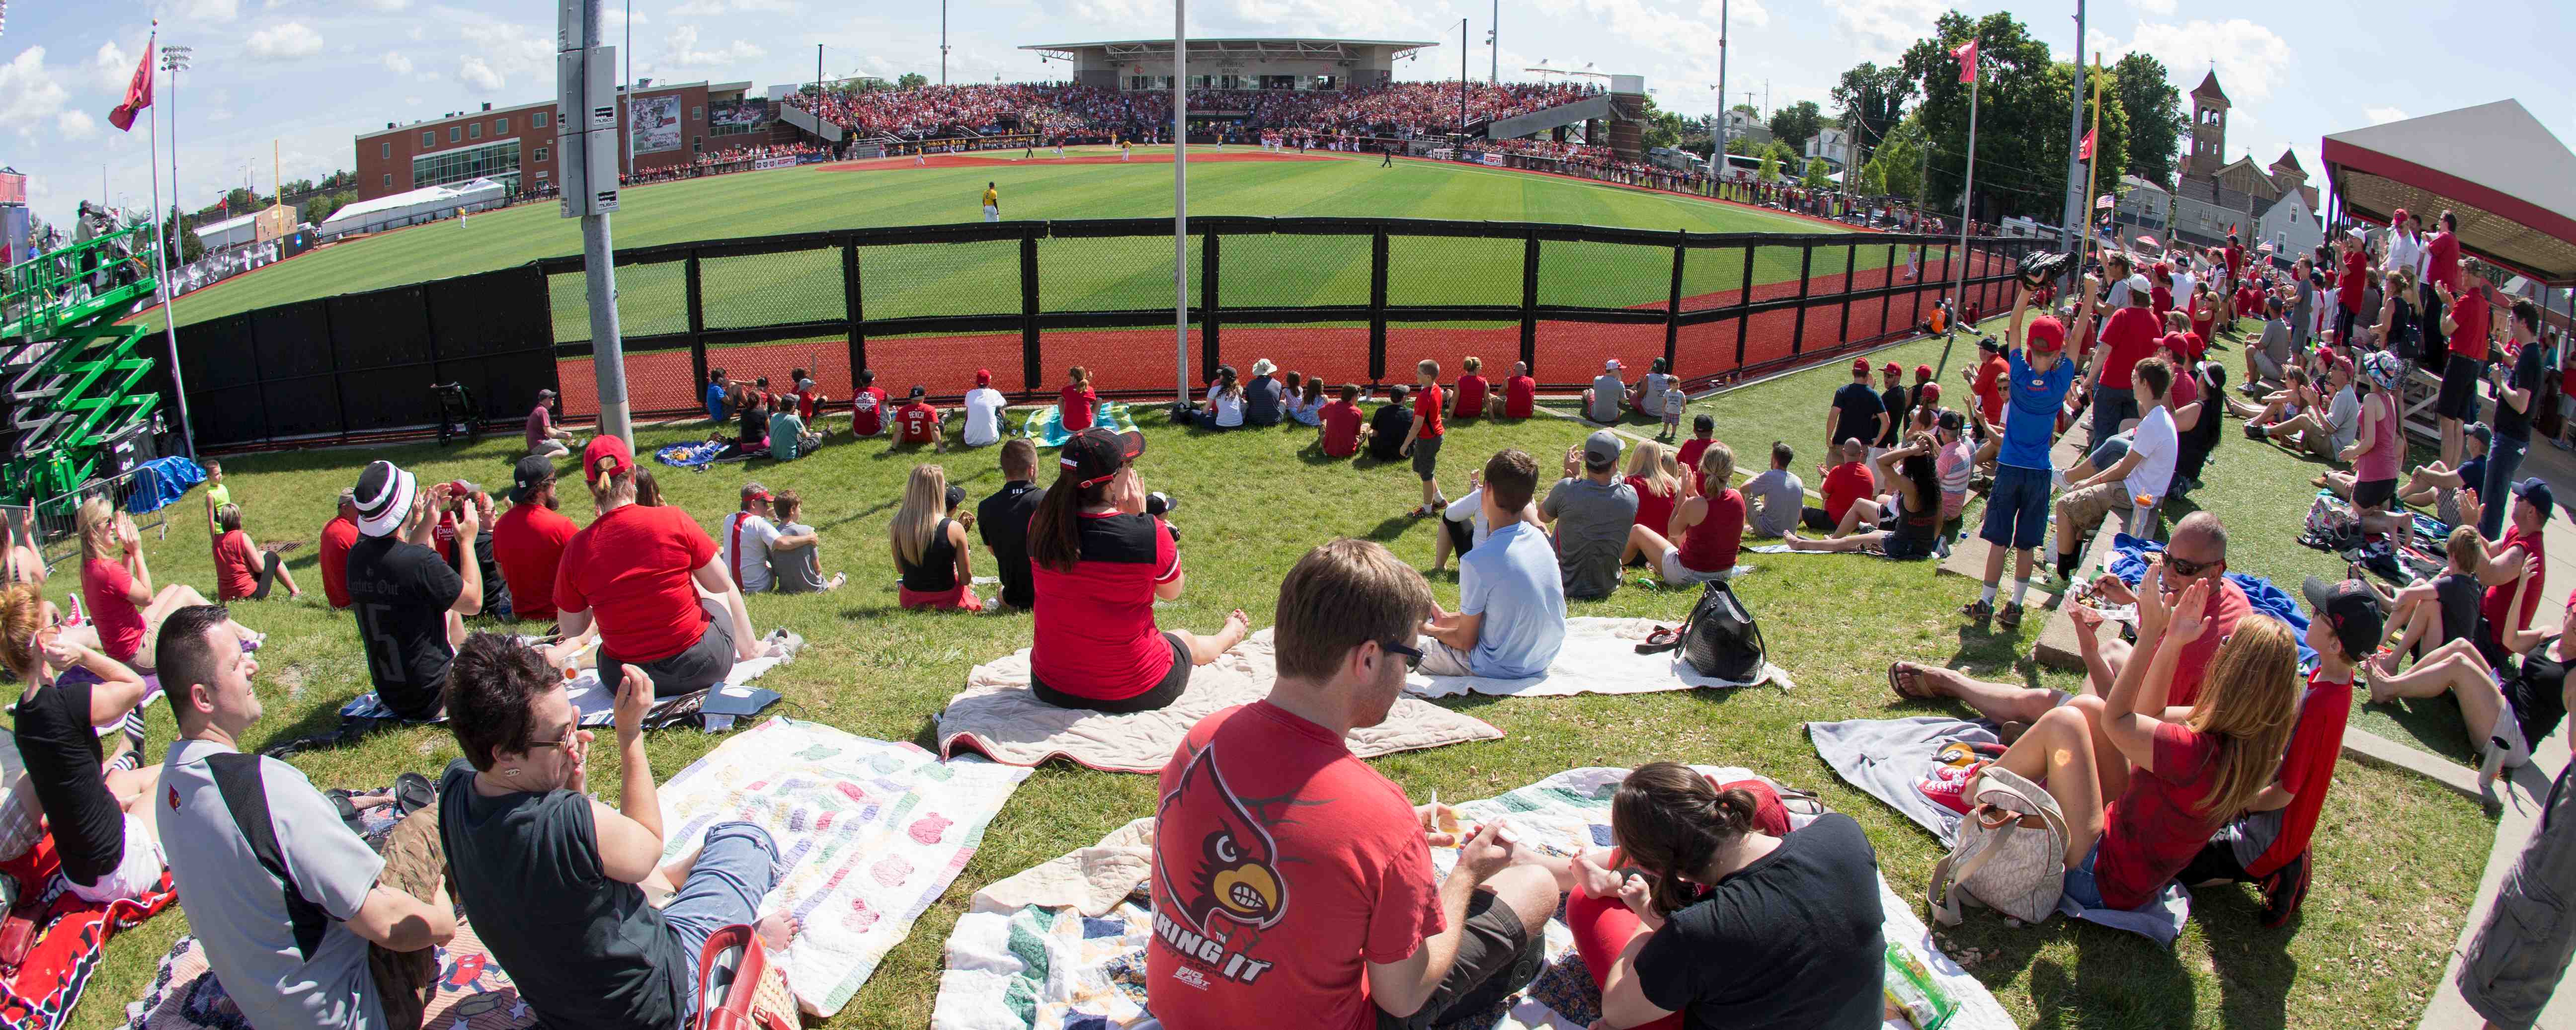 University of Louisville Baseball - Winter Camp dates are here! Sign up now  ➡️ GoCards.com/BSBcamps #GoCards